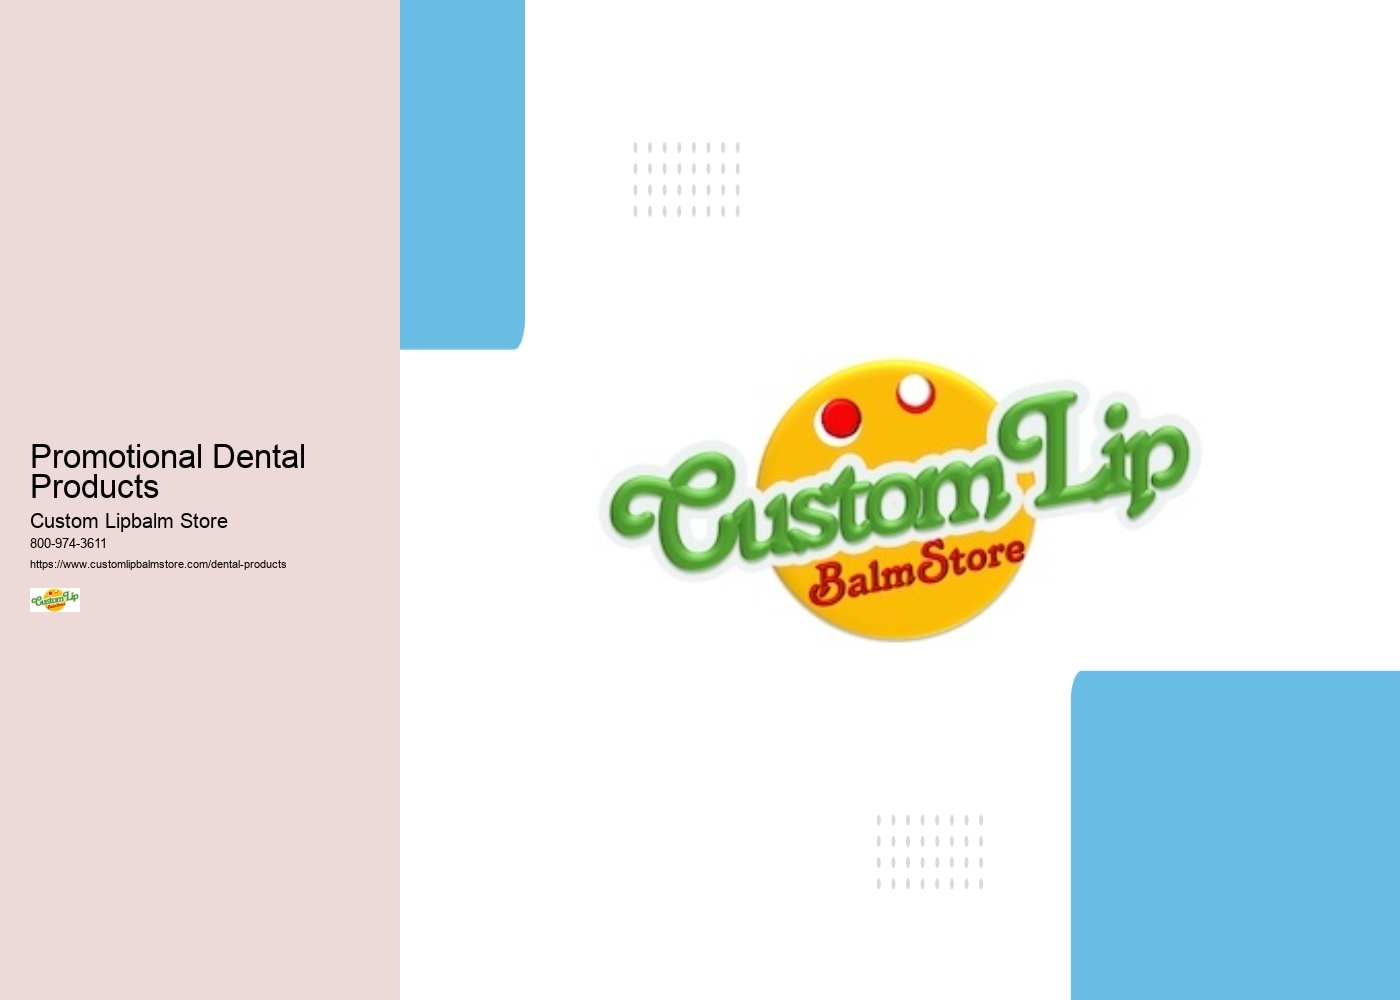 Promotional Dental Products